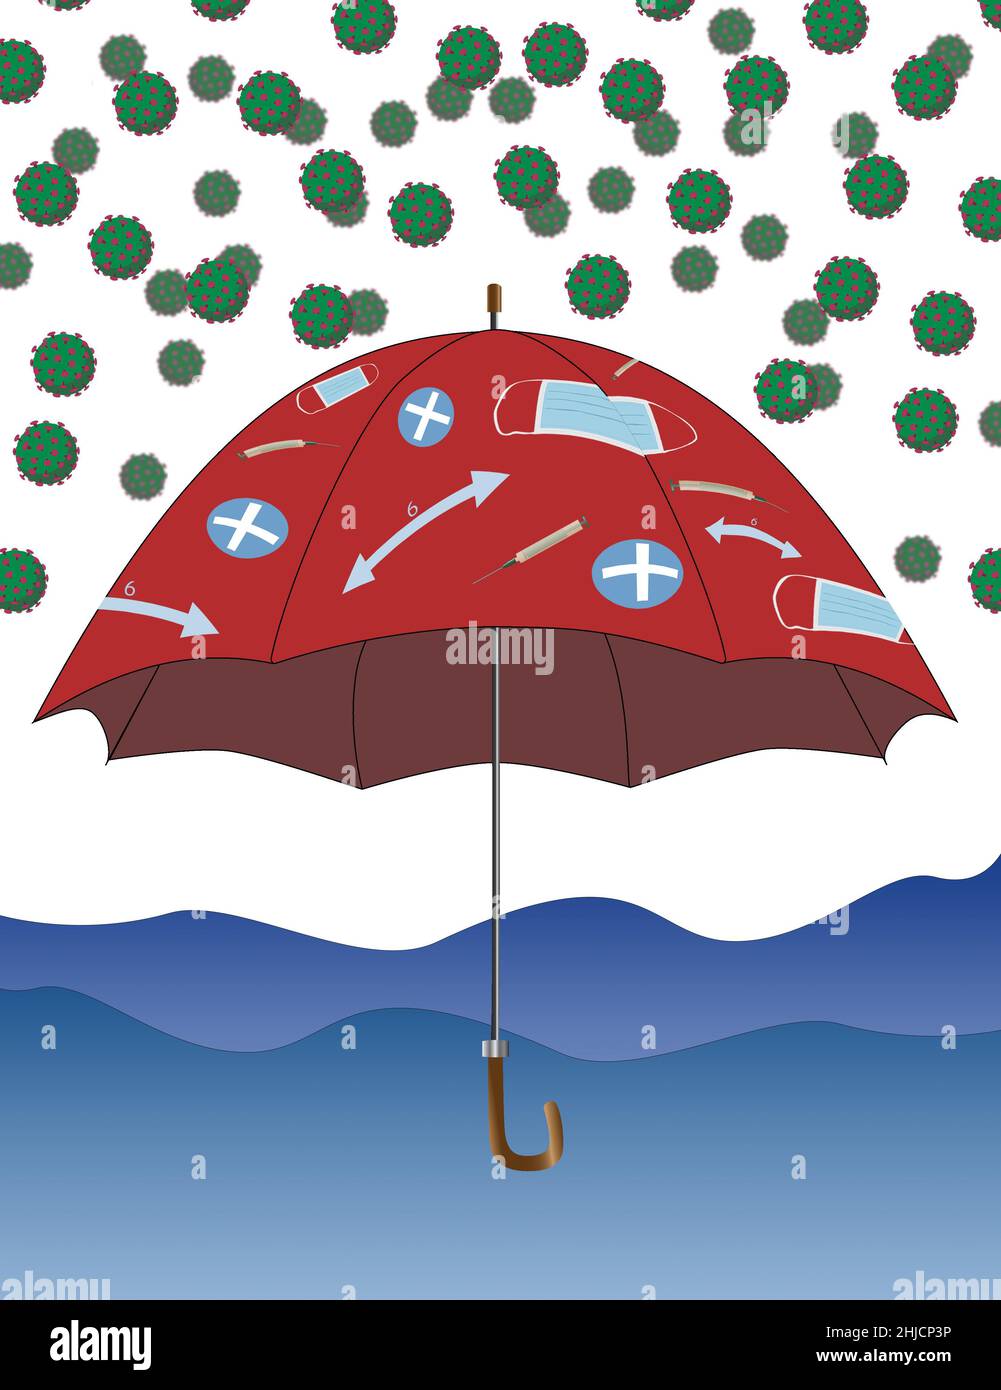 An umbrella with symbols of protection against the coronavirus or COVID-19. Symbols are a syringe with the vaccine, social distancing, healthcare, and masks. Stock Photo